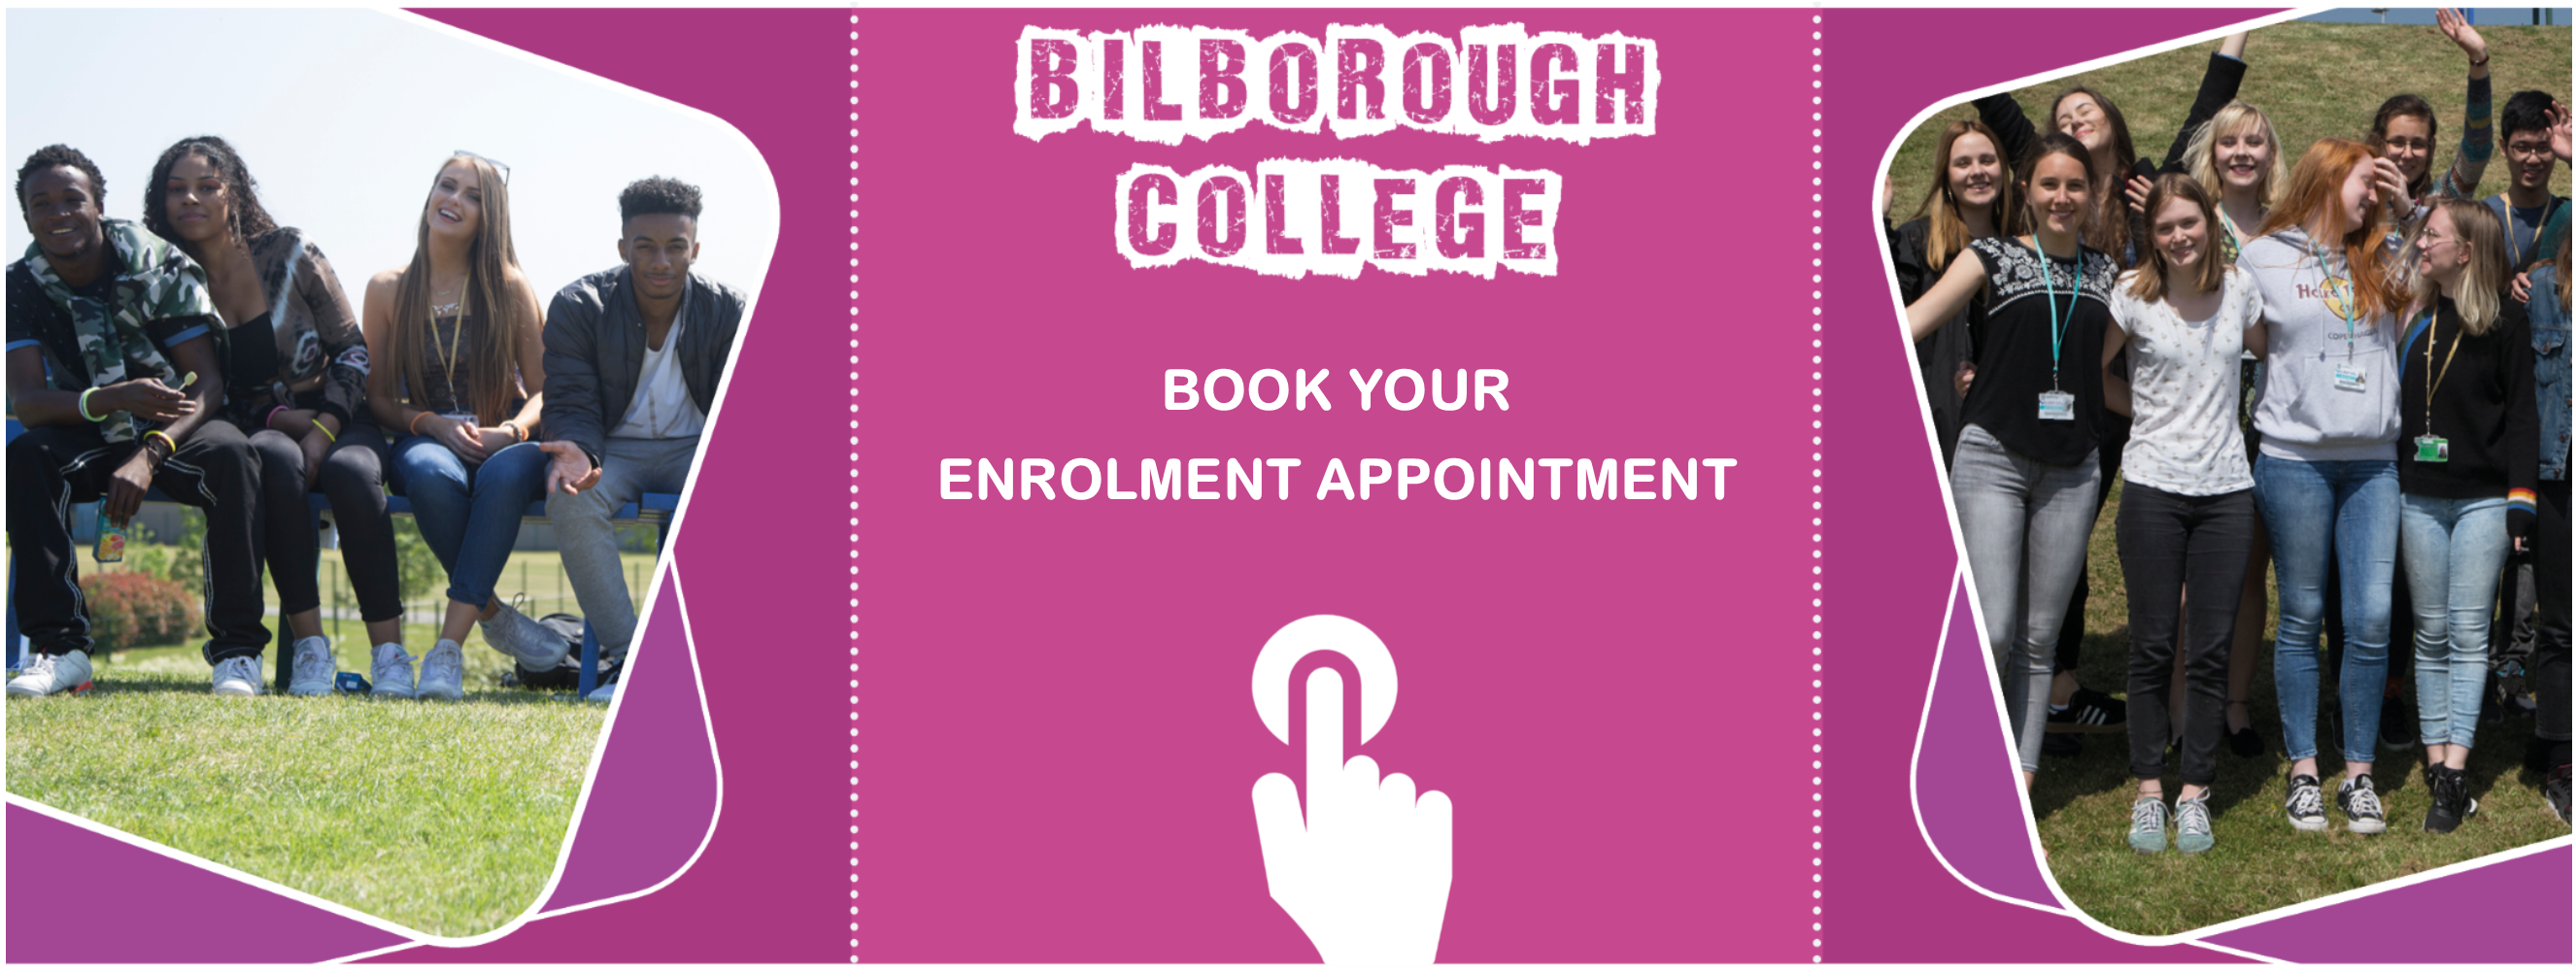 Enrolment Bookings for applicants ONLY